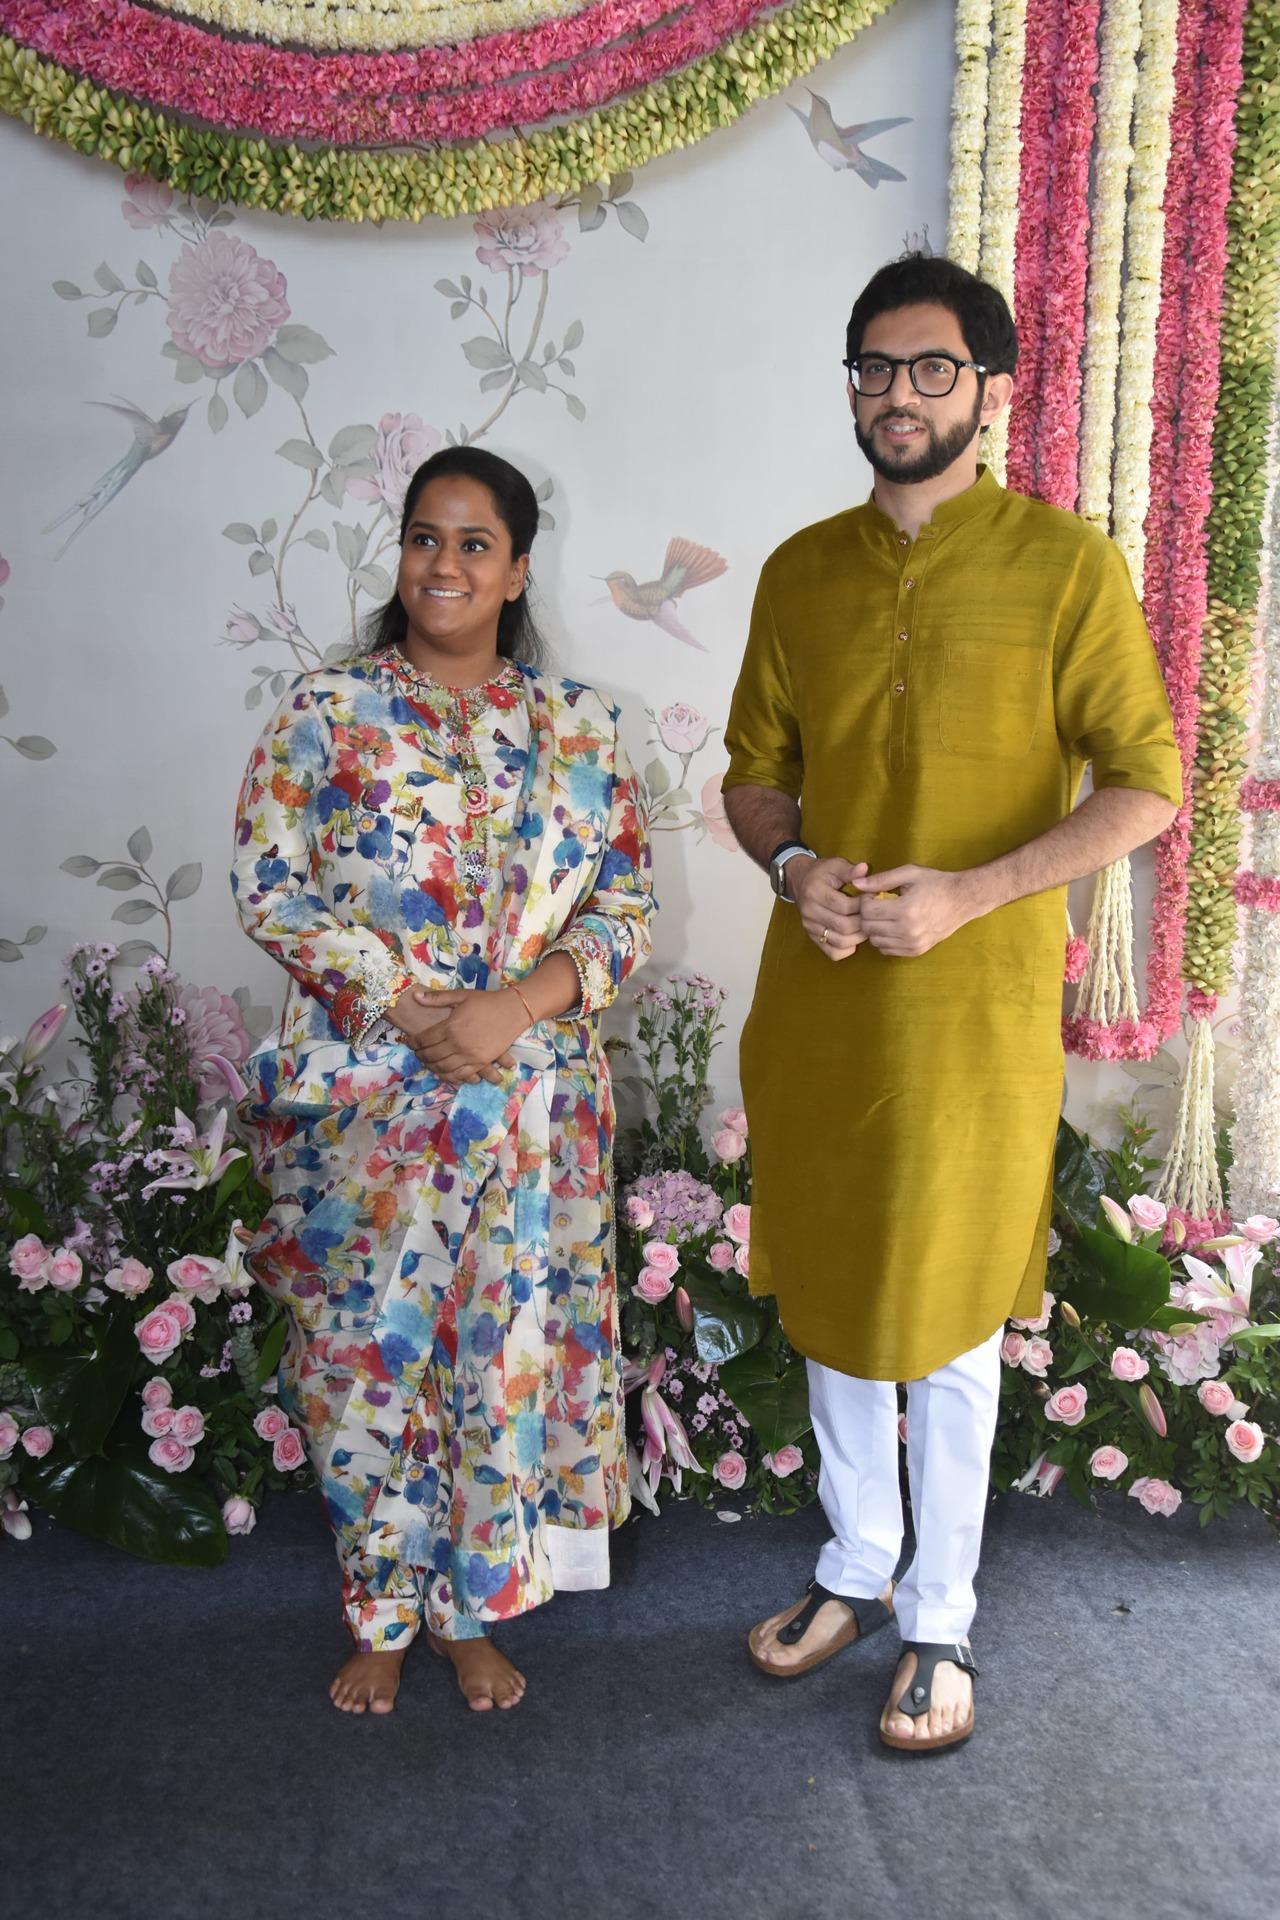 Arpita posed with Aditya Thackeray, as the political came to seek blessings at her Ganesh Chaturthi celebration